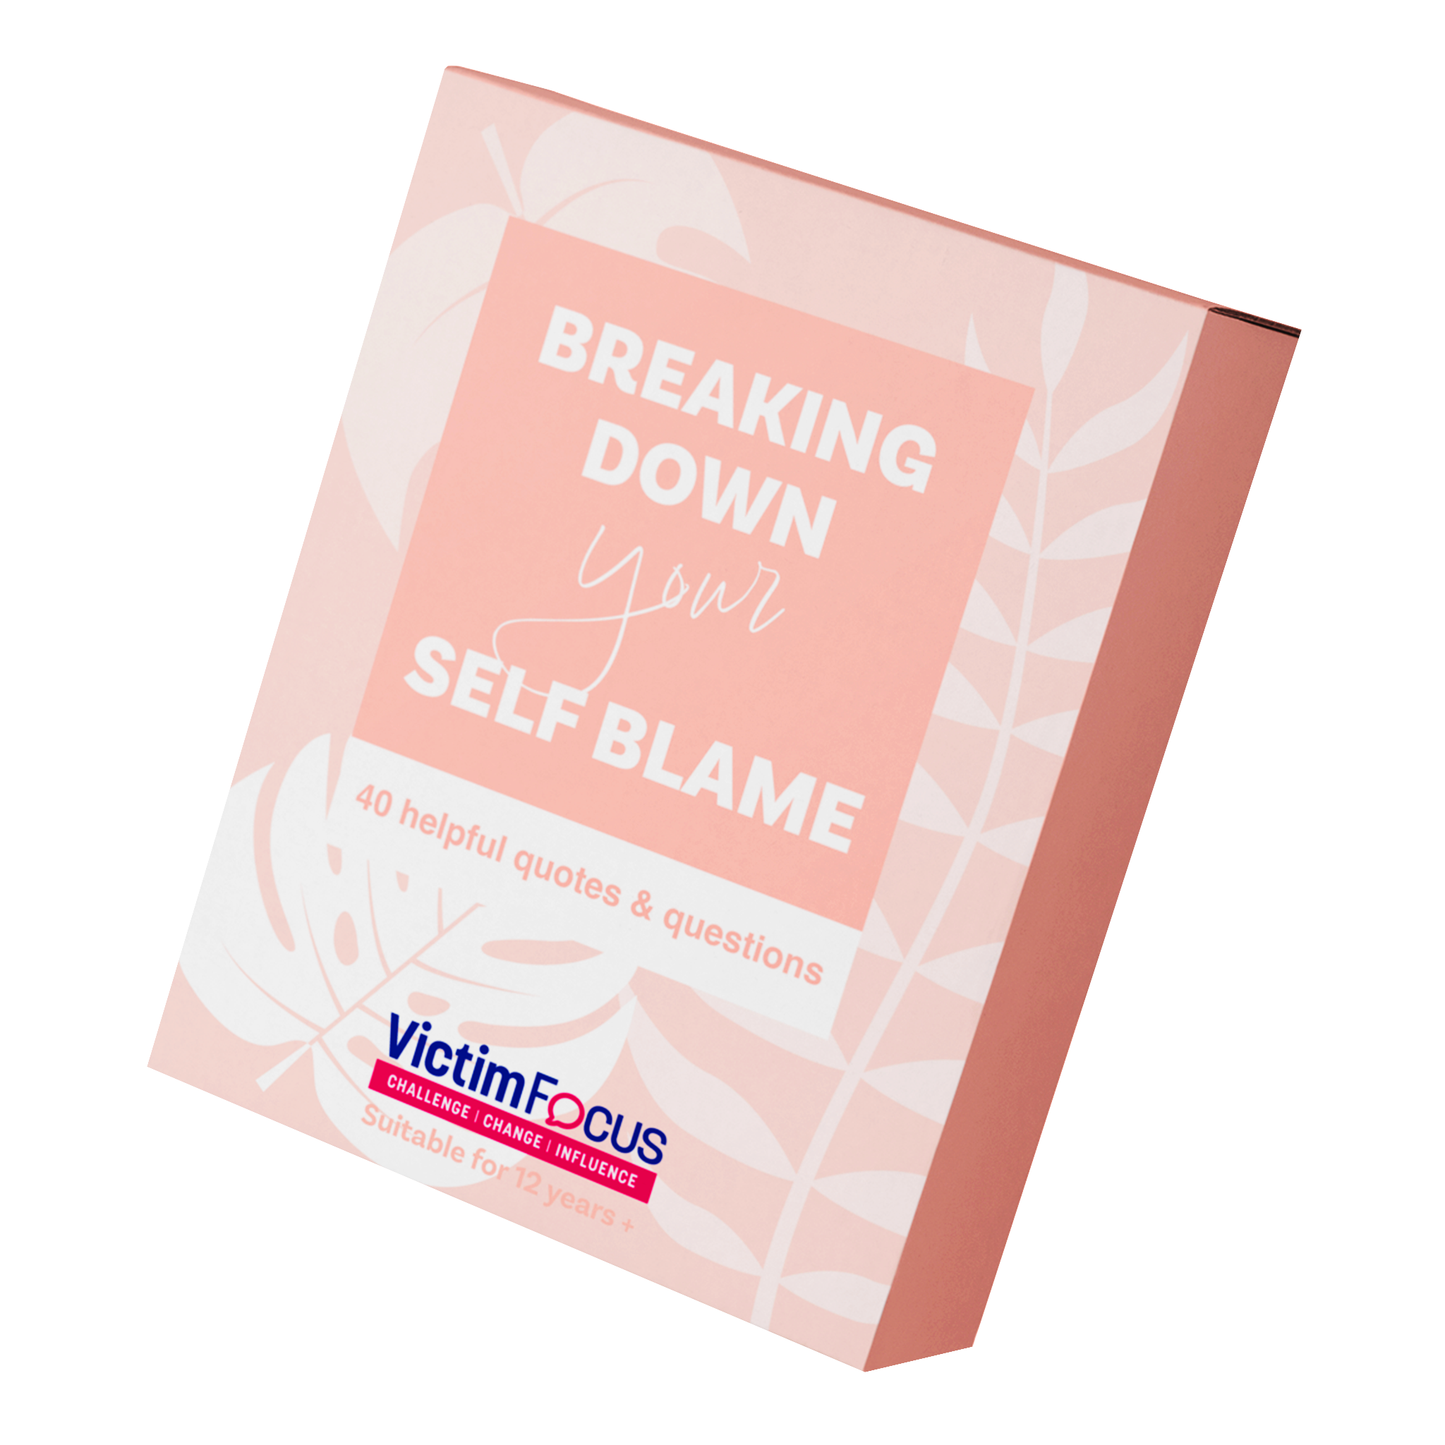 Breaking down your self-blame: 40 helpful quotes and questions